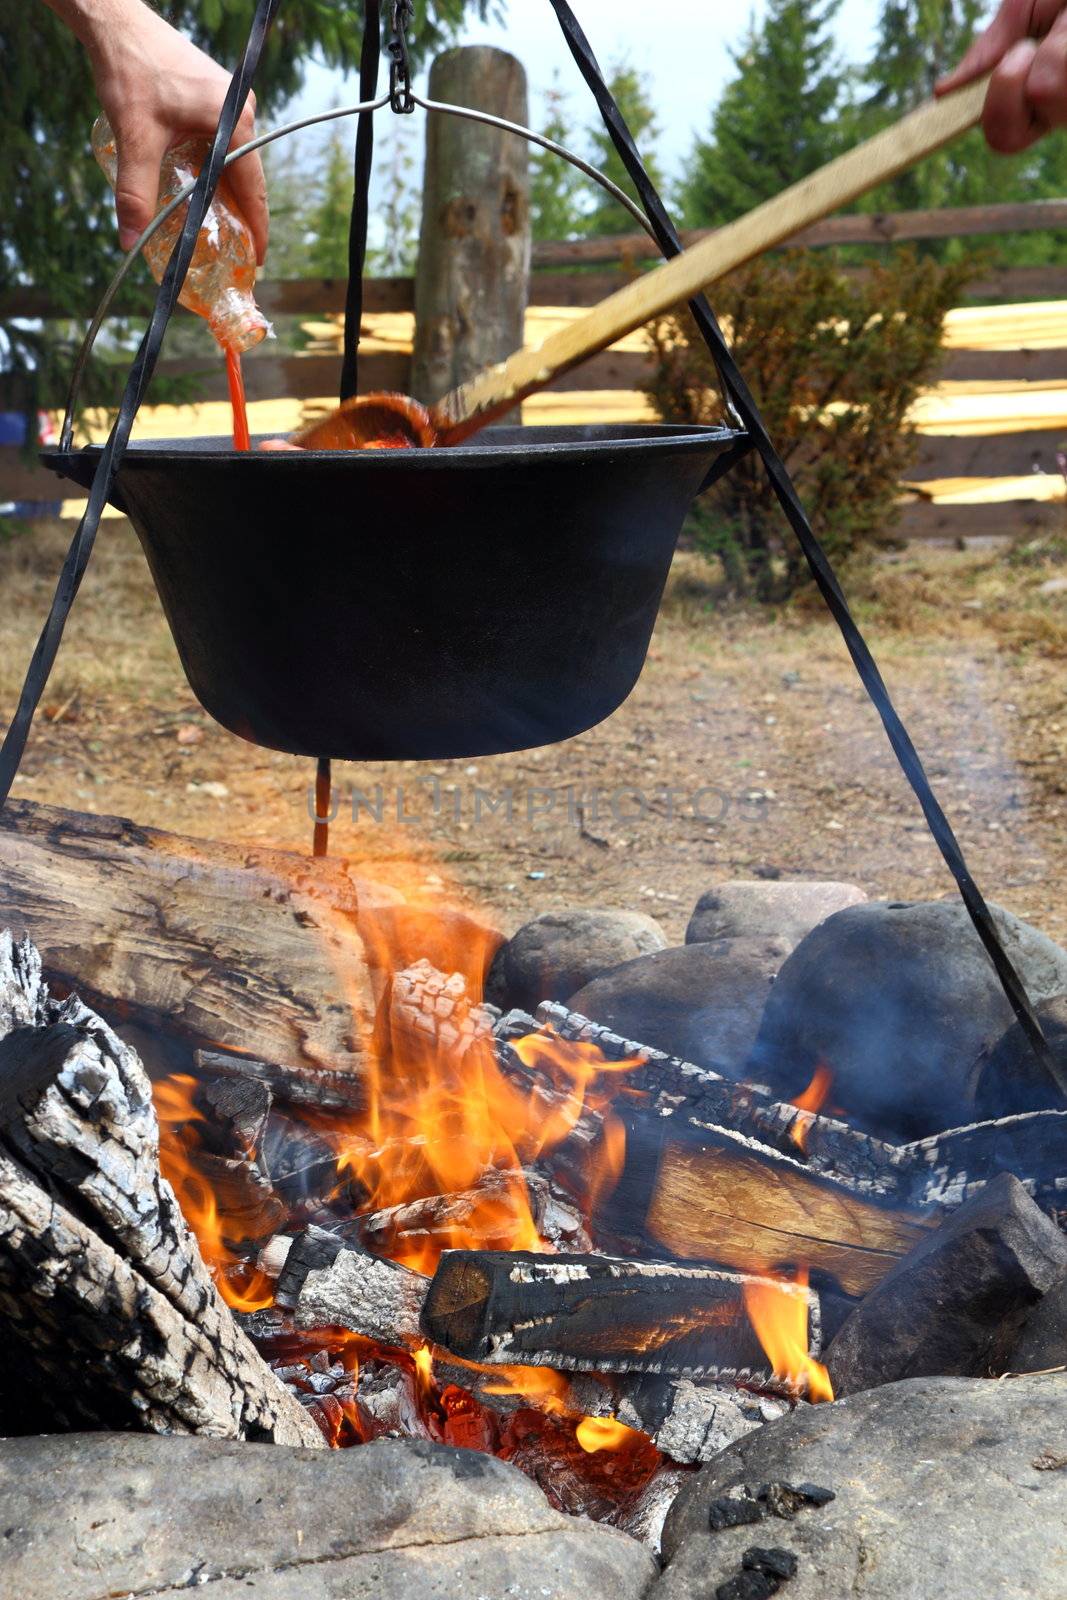 outdoor cooking in cauldron over the fire